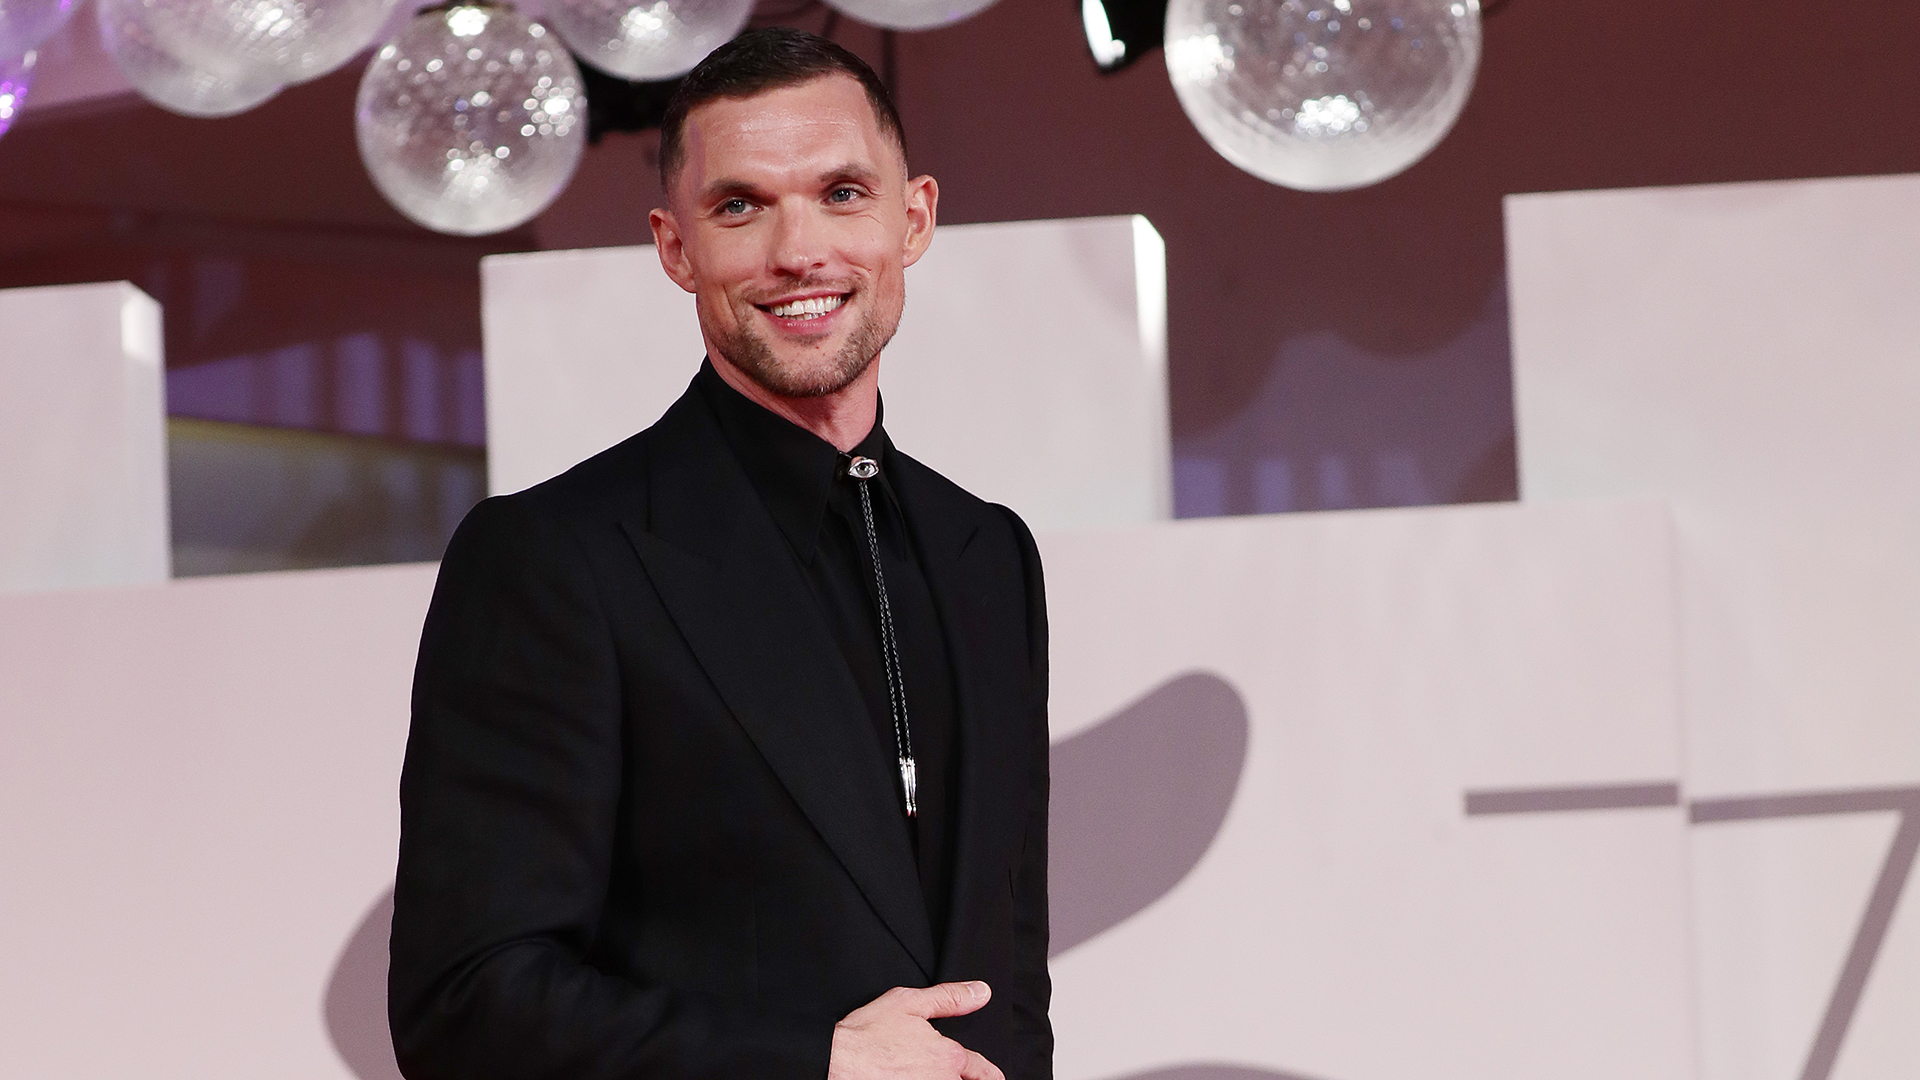 WATCH: Ed Skrein Pursues Pop Comeback in 'I Used to Be Famous' Trailer